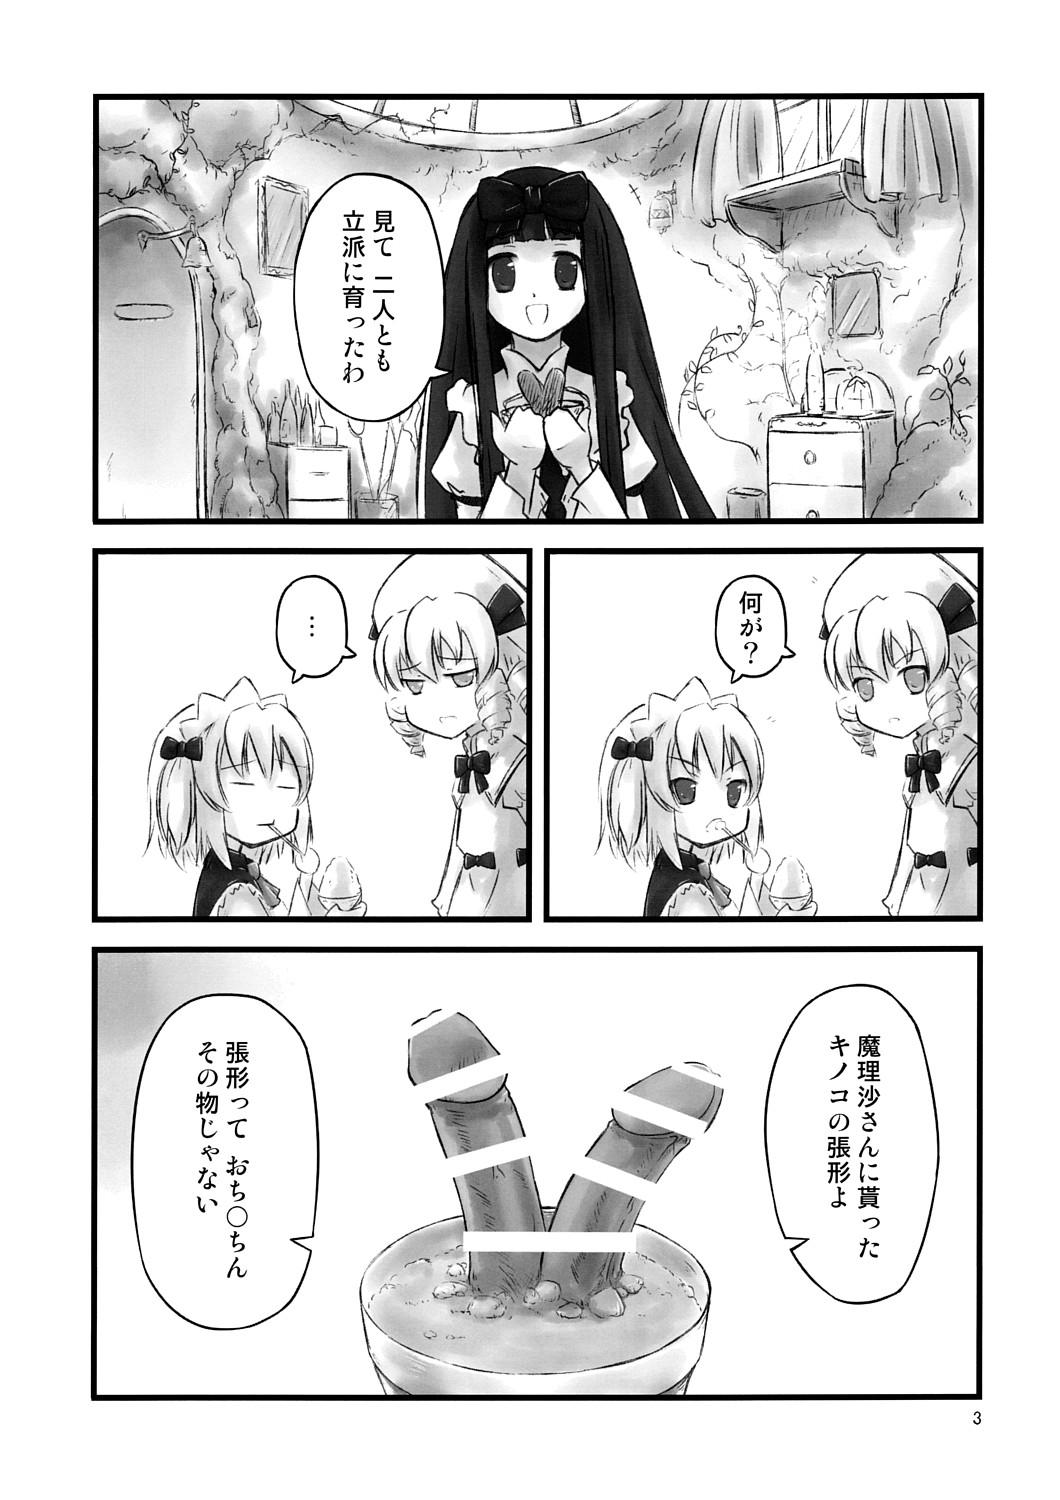 Hijab cook off - Touhou project Nudist - Page 2